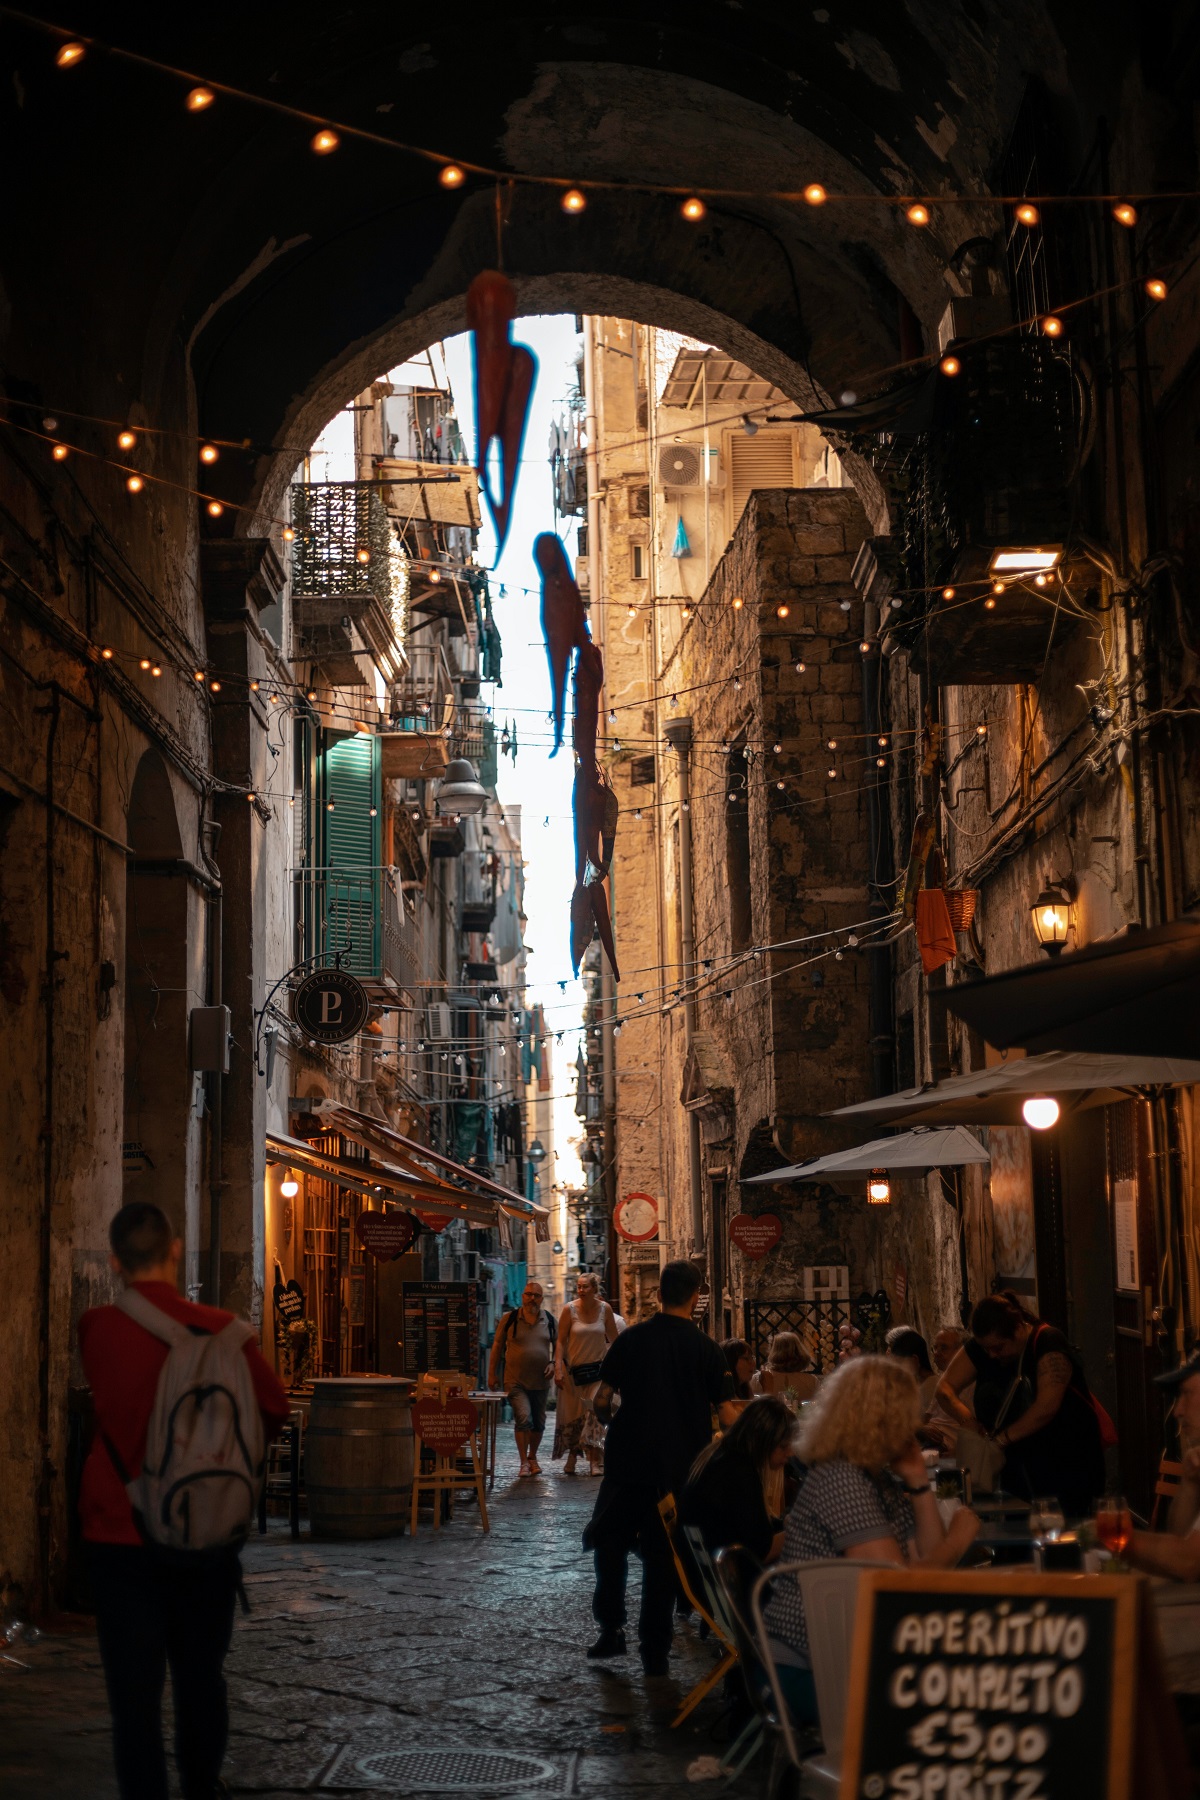 Quartieri Spagnoli at night with restaurants and bars in central Naples